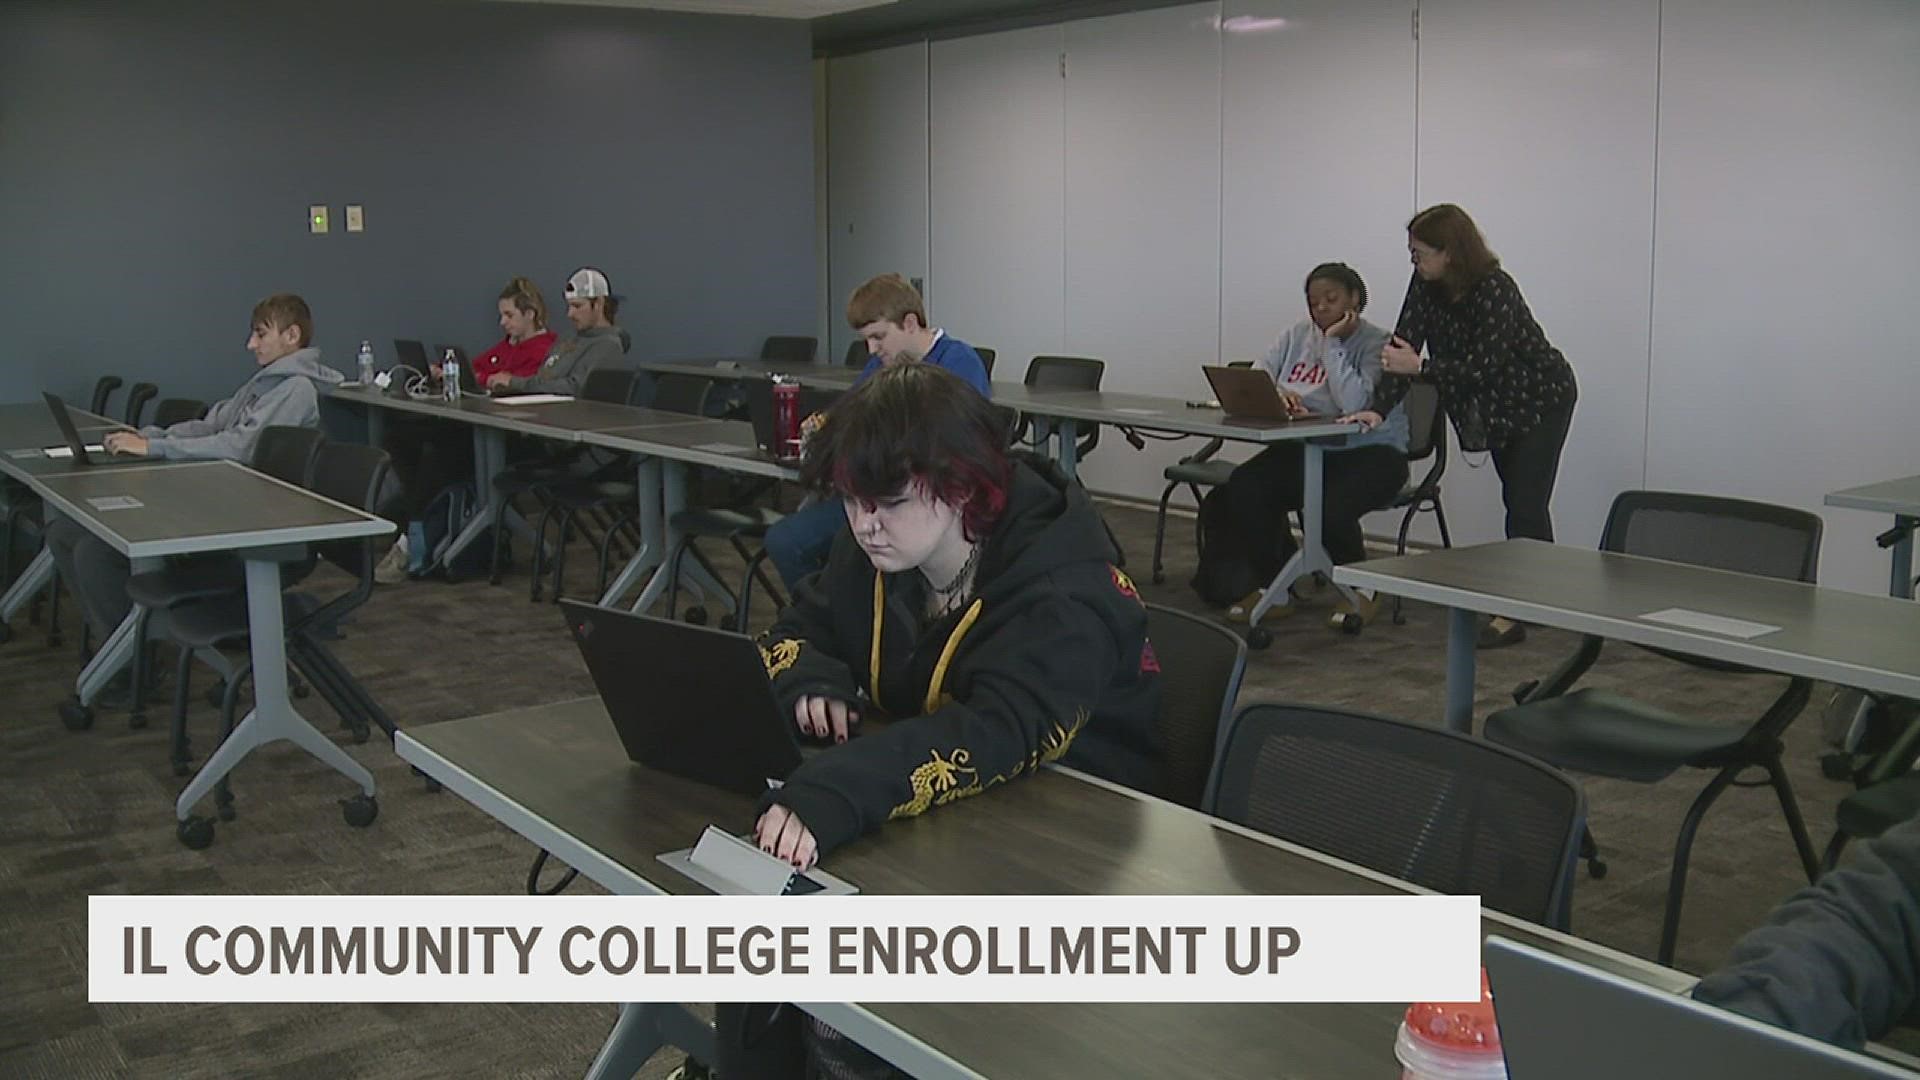 According to a study by the Illinois Community College board, fall 2022 enrollment is up by 1.5% - higher than the national average which is flat.